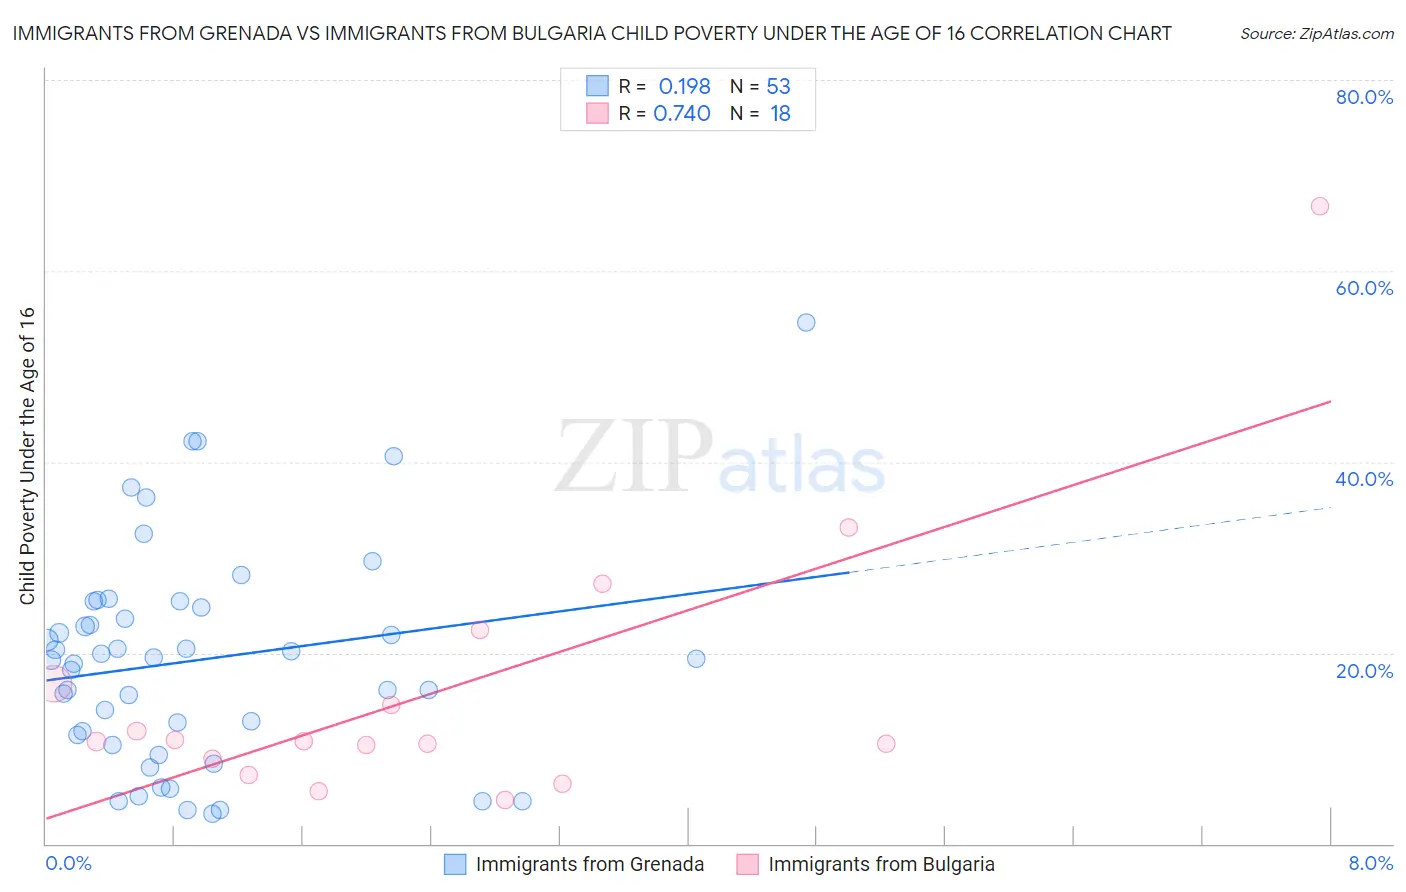 Immigrants from Grenada vs Immigrants from Bulgaria Child Poverty Under the Age of 16